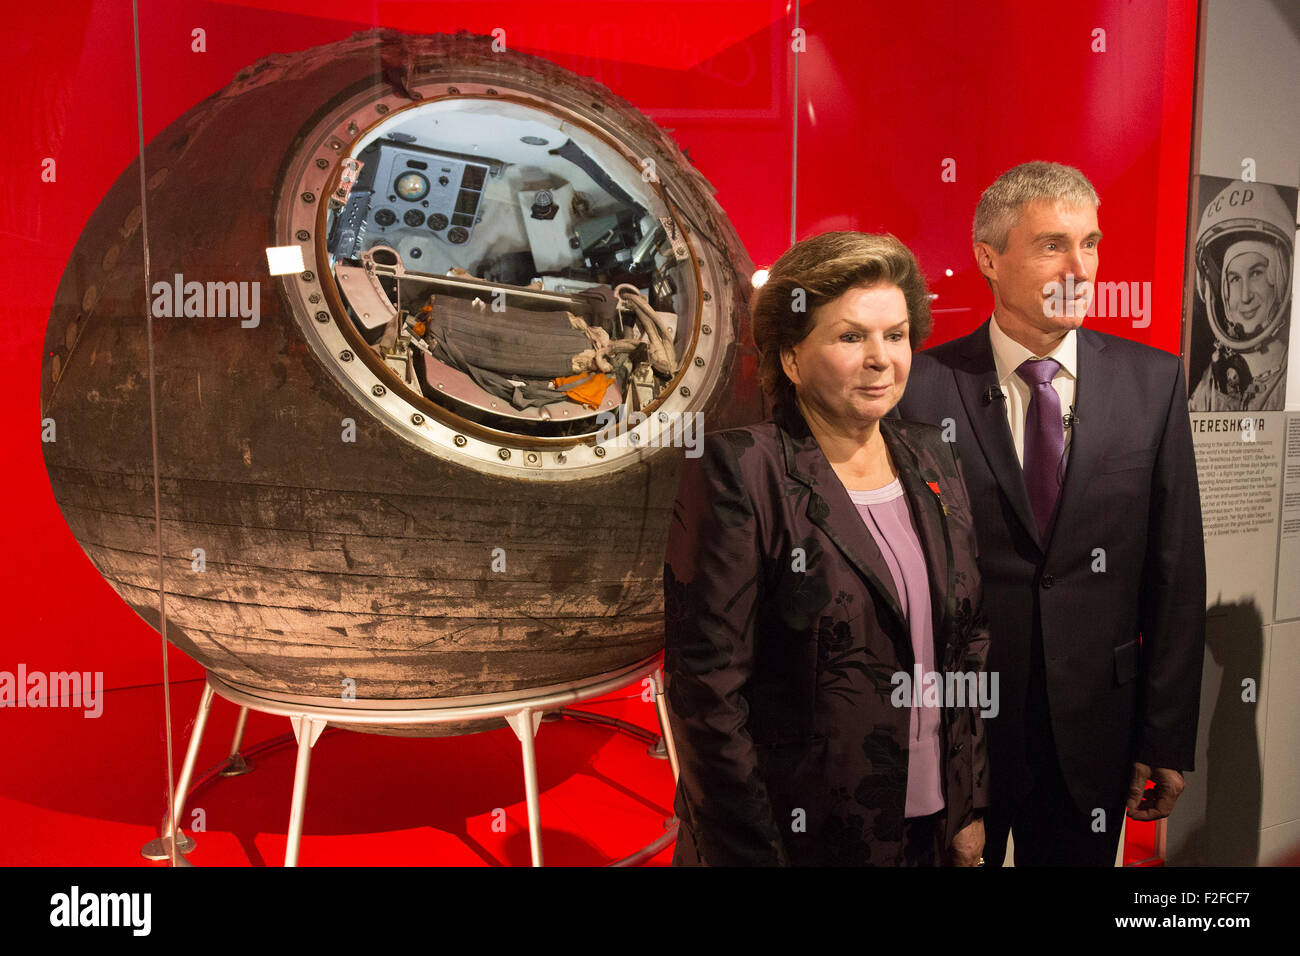 London, UK. 17/09/2015. Cosmonauts Valentina Tereshkova and Sergei Krikalev pose in front of the spacecraft Vostok-6 that took Tereshkova into space. The exhibition Cosmonauts - Birth of the Space Age opens at the Science Museum on 18 September 2015 and runs until 13 March 2016. Stock Photo